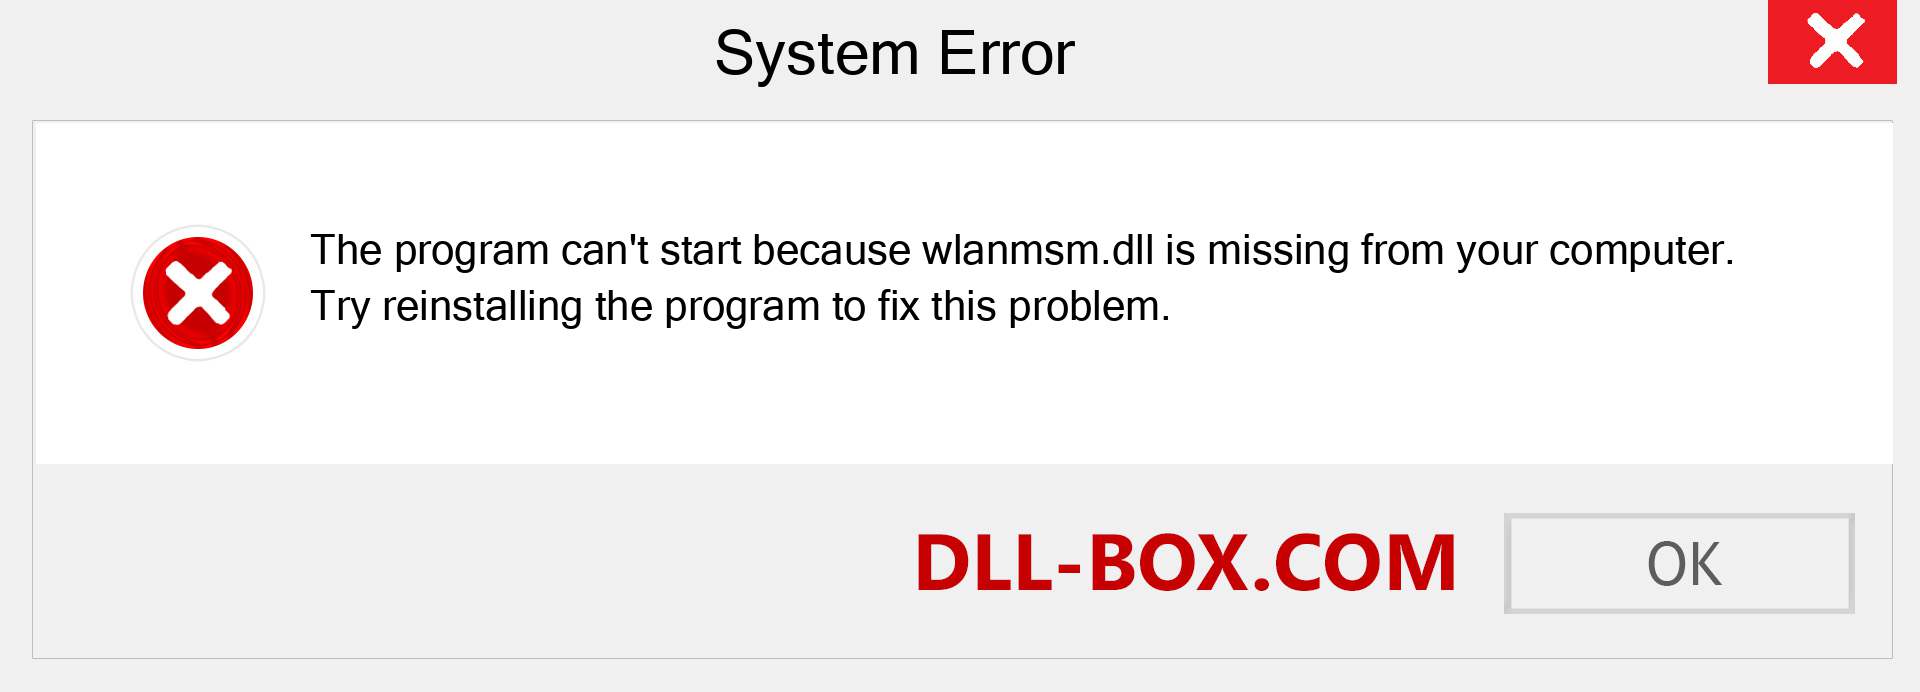  wlanmsm.dll file is missing?. Download for Windows 7, 8, 10 - Fix  wlanmsm dll Missing Error on Windows, photos, images